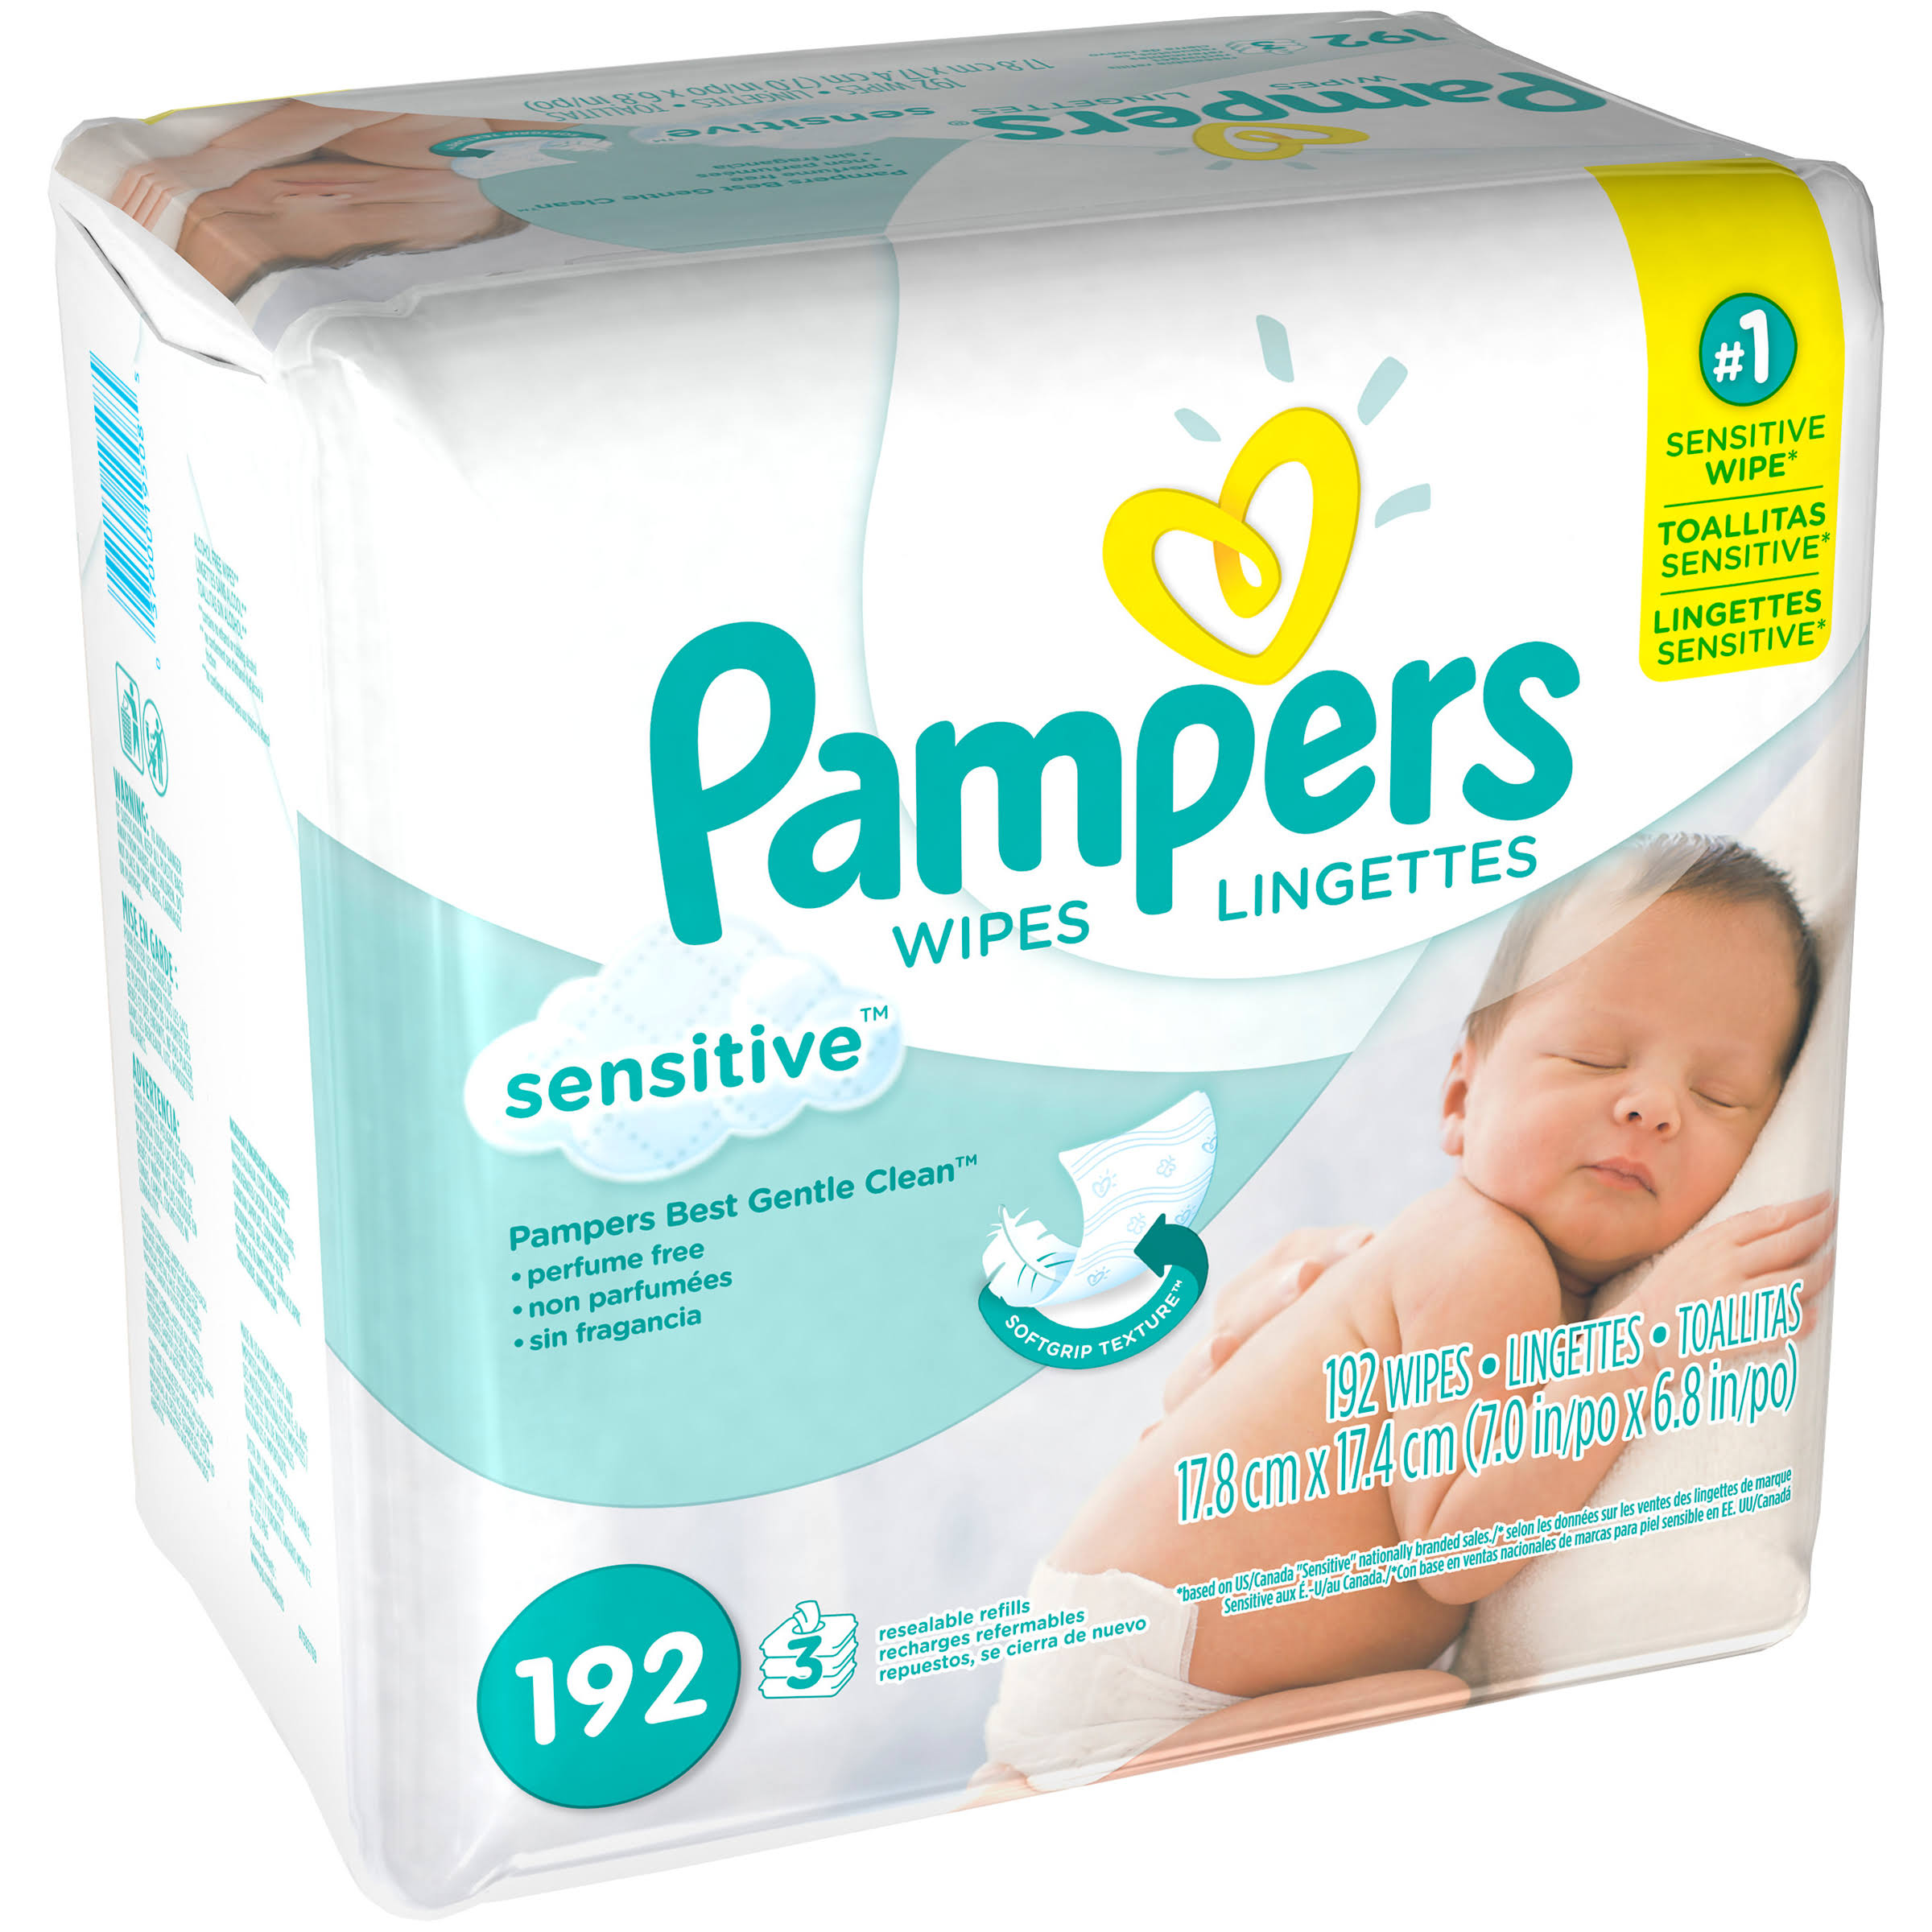 Pampers Sensitive Wipes - 192 Pack